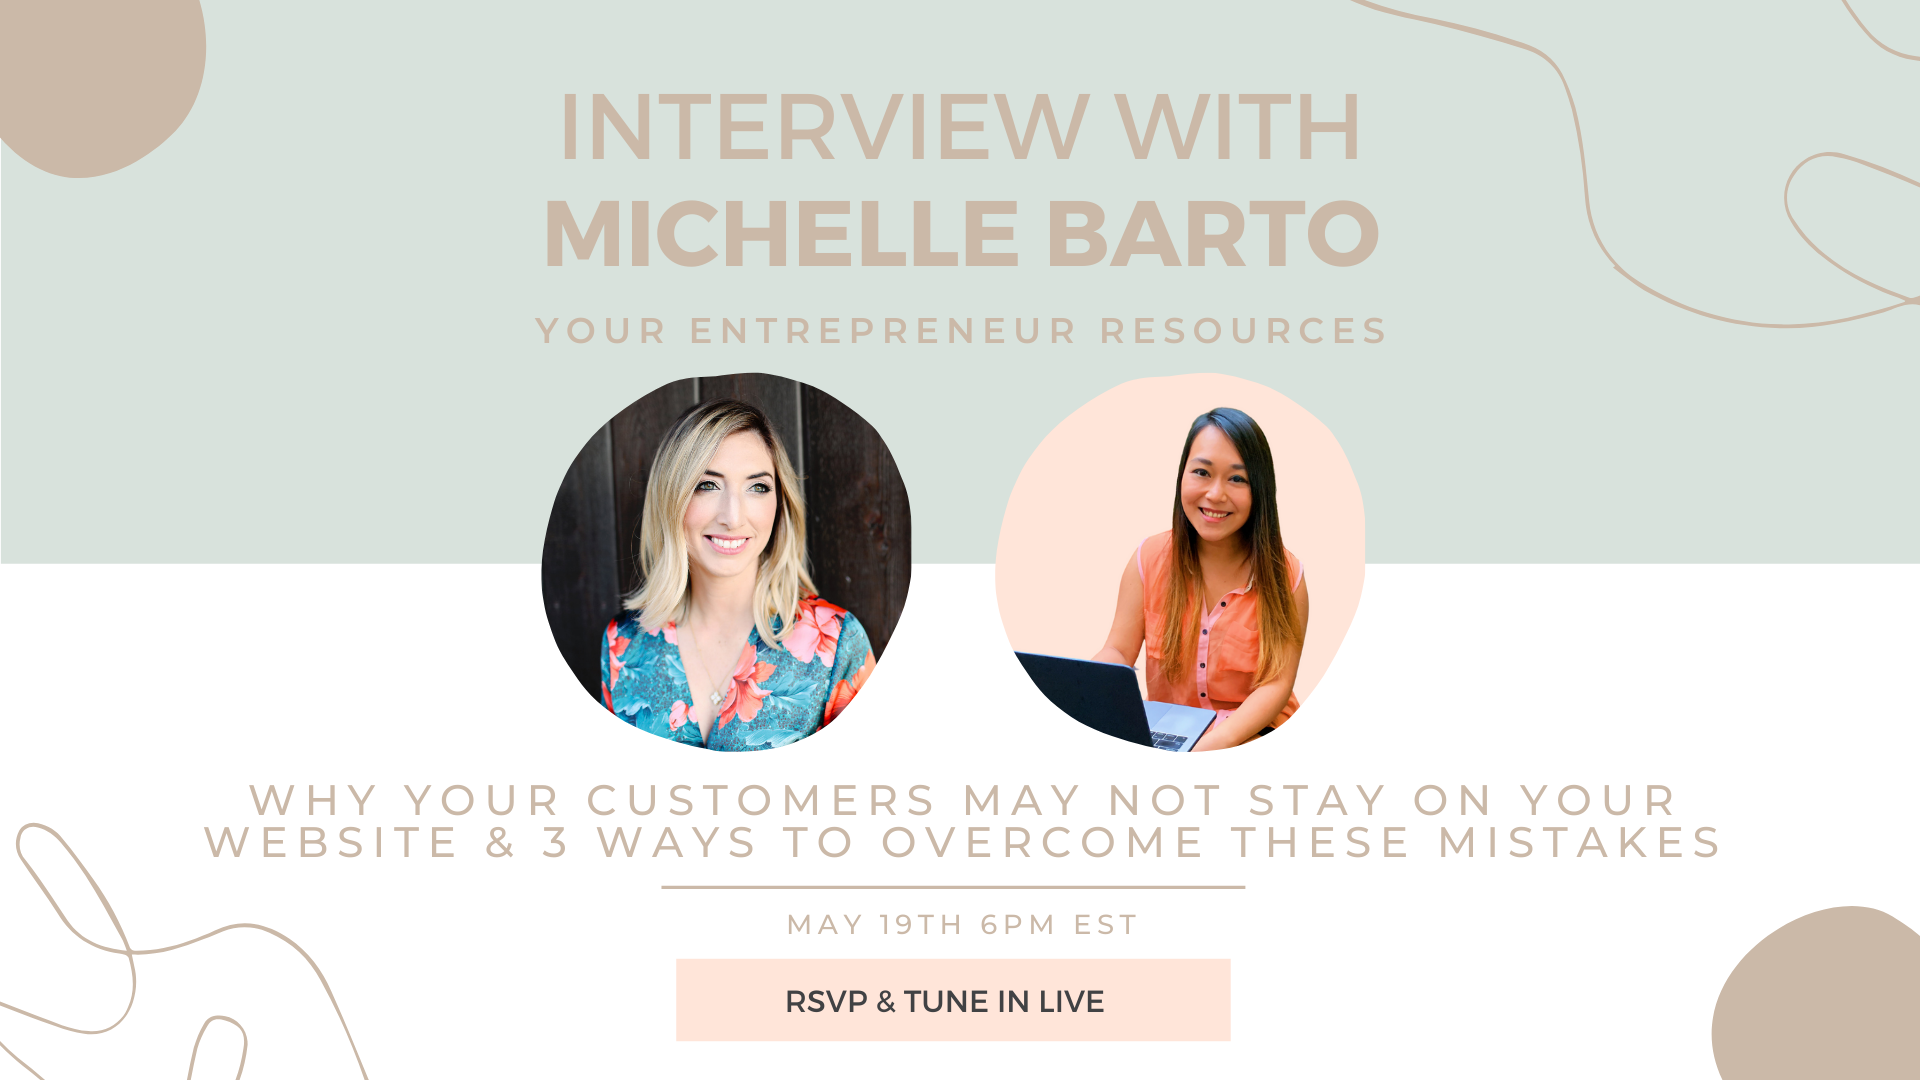 Why your customers may not stay on your website & 3 ways to overcome these mistakes with Michelle Barto